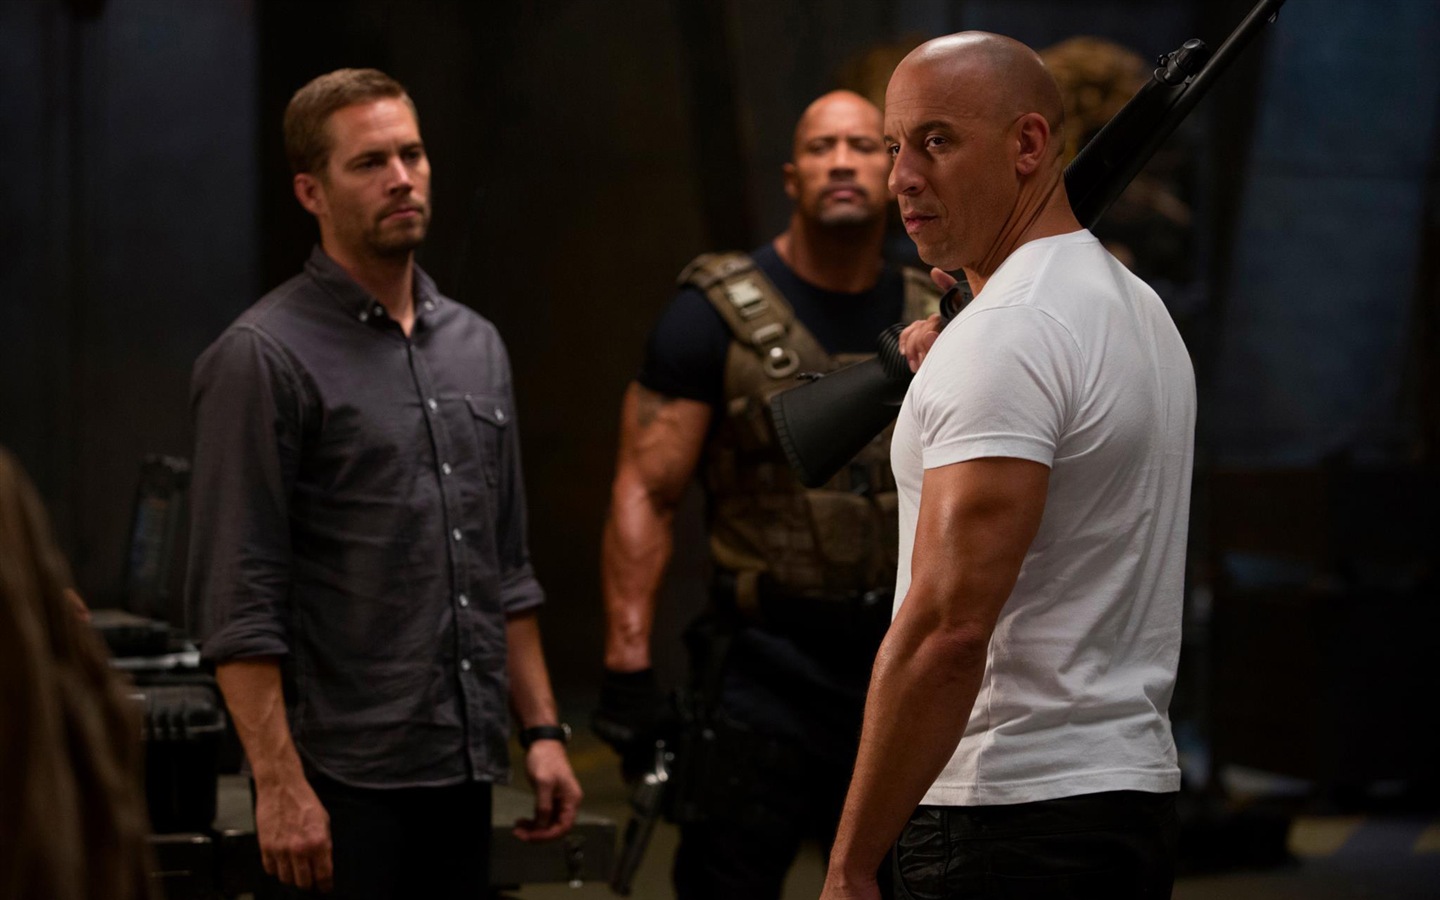 Fast And Furious 6 HD movie wallpapers #5 - 1440x900